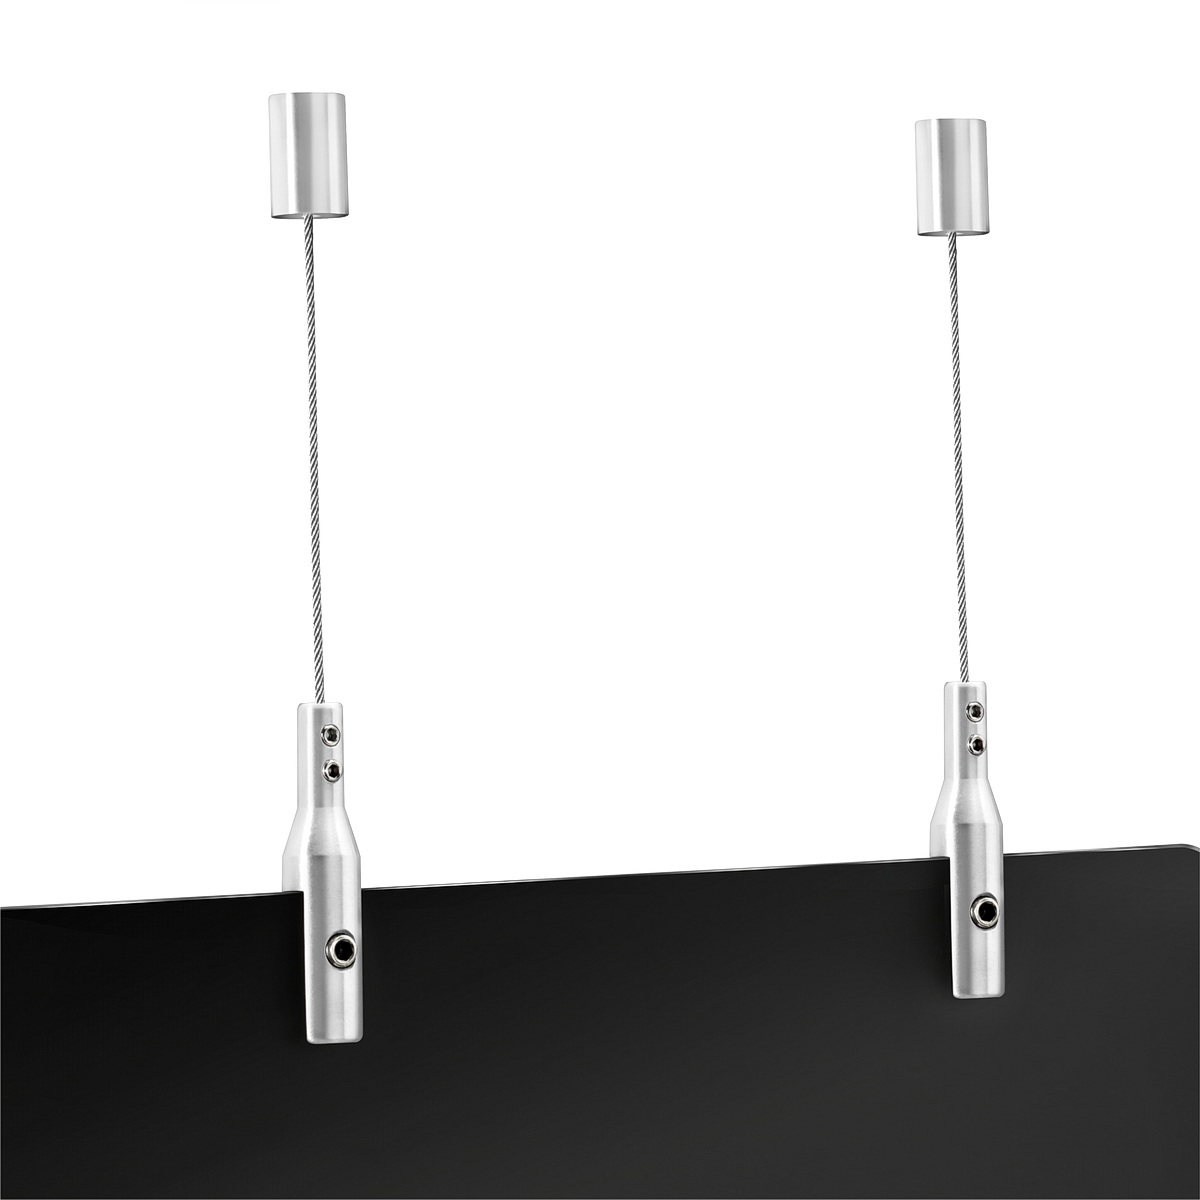 Suspended Cable System Kit (2 full set) Aluminum Clear Anodized finish - 1/16'' Diameter Cable